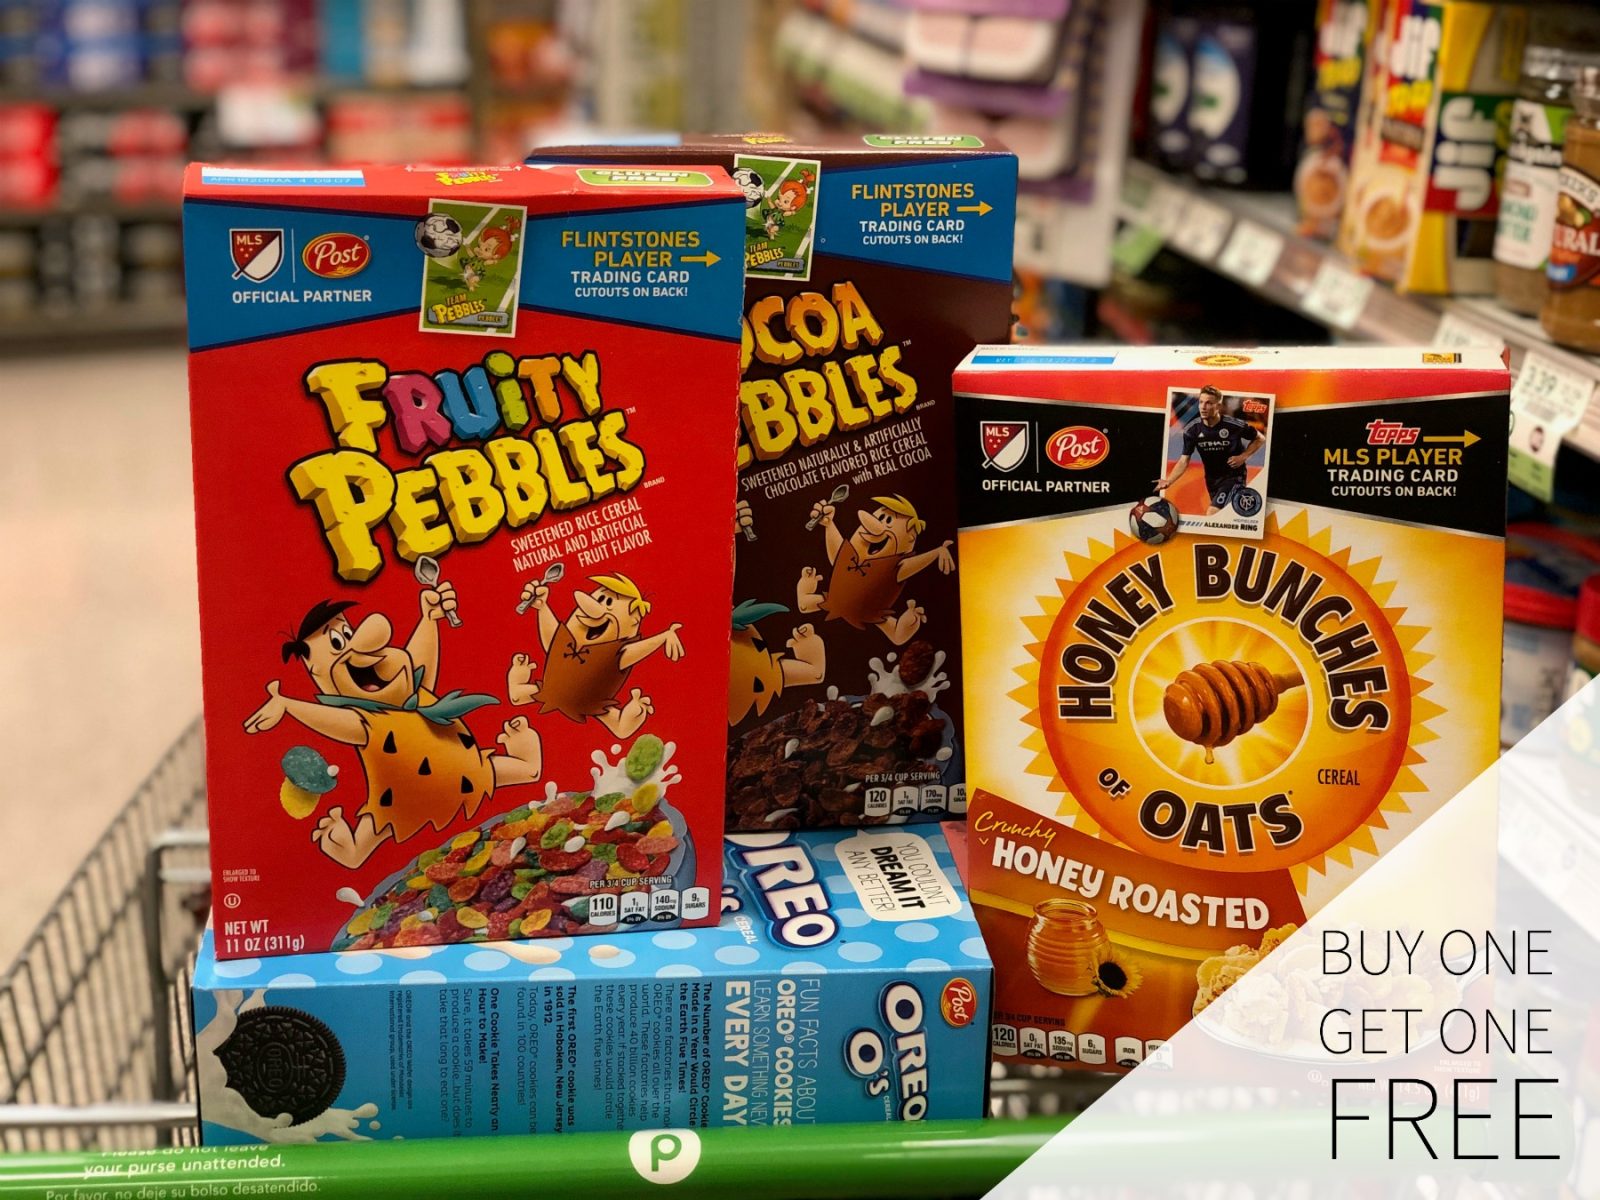 Your Favorite Post Cereals Are Buy One, Get One FREE Through 6/19 (6/18 for some)